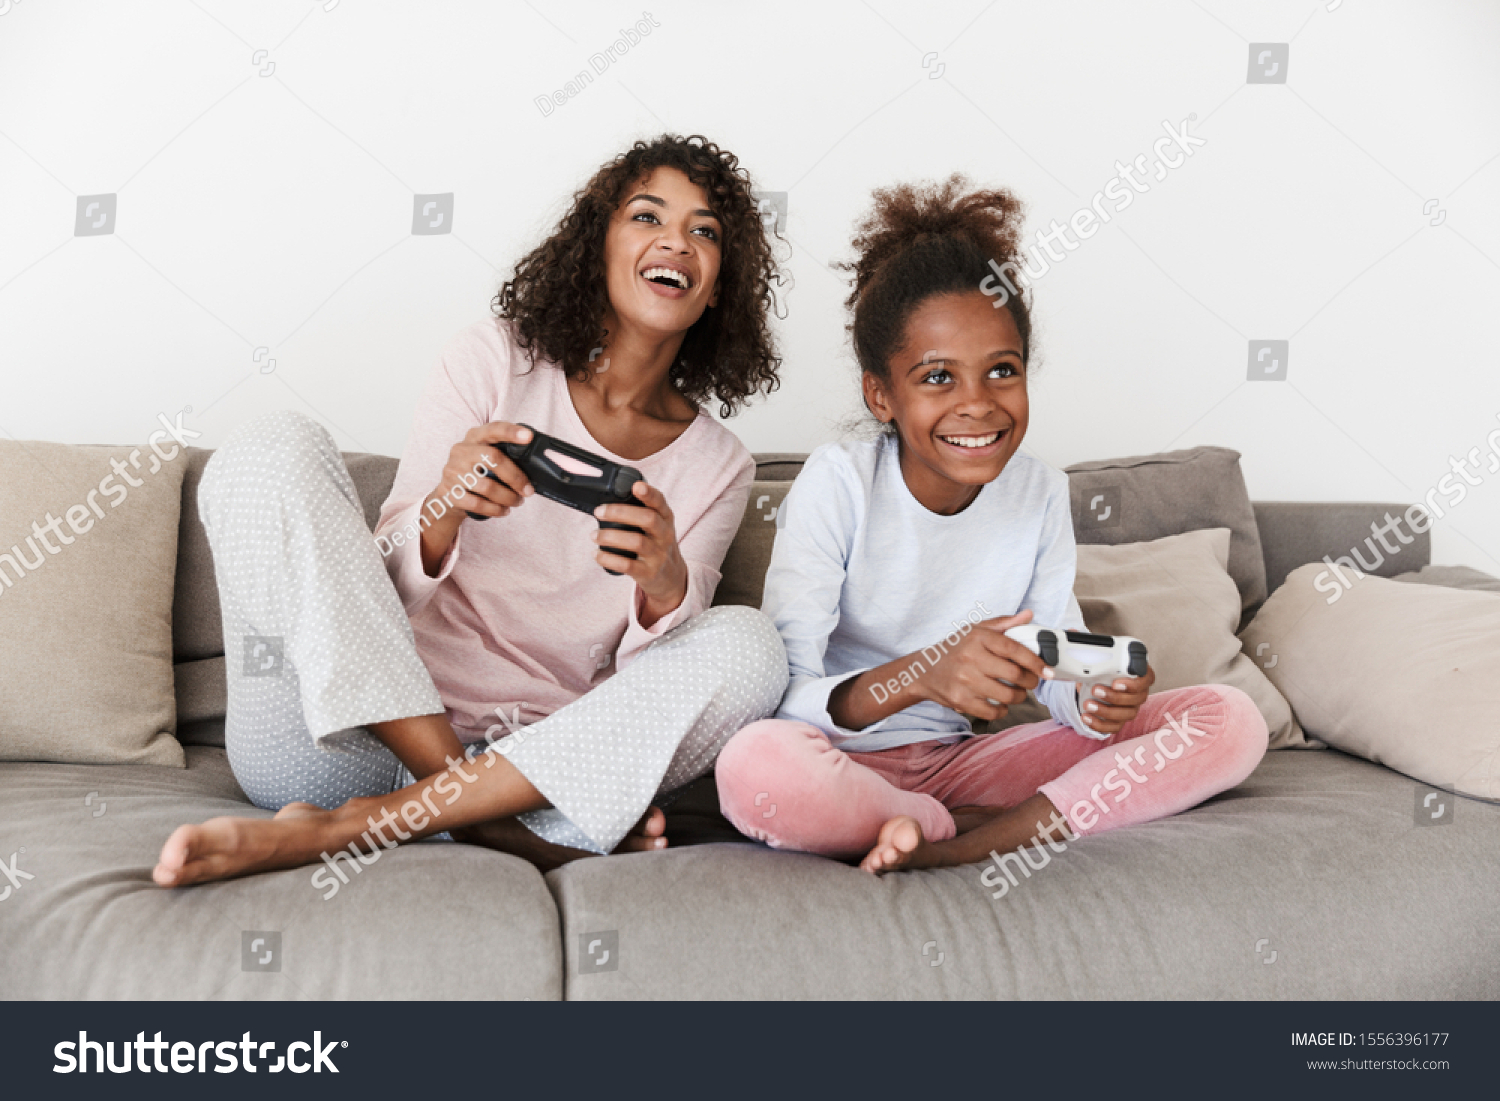 Smiling young mother and her little daughter wearing pajamas releaxing on a couch, playing video games #1556396177